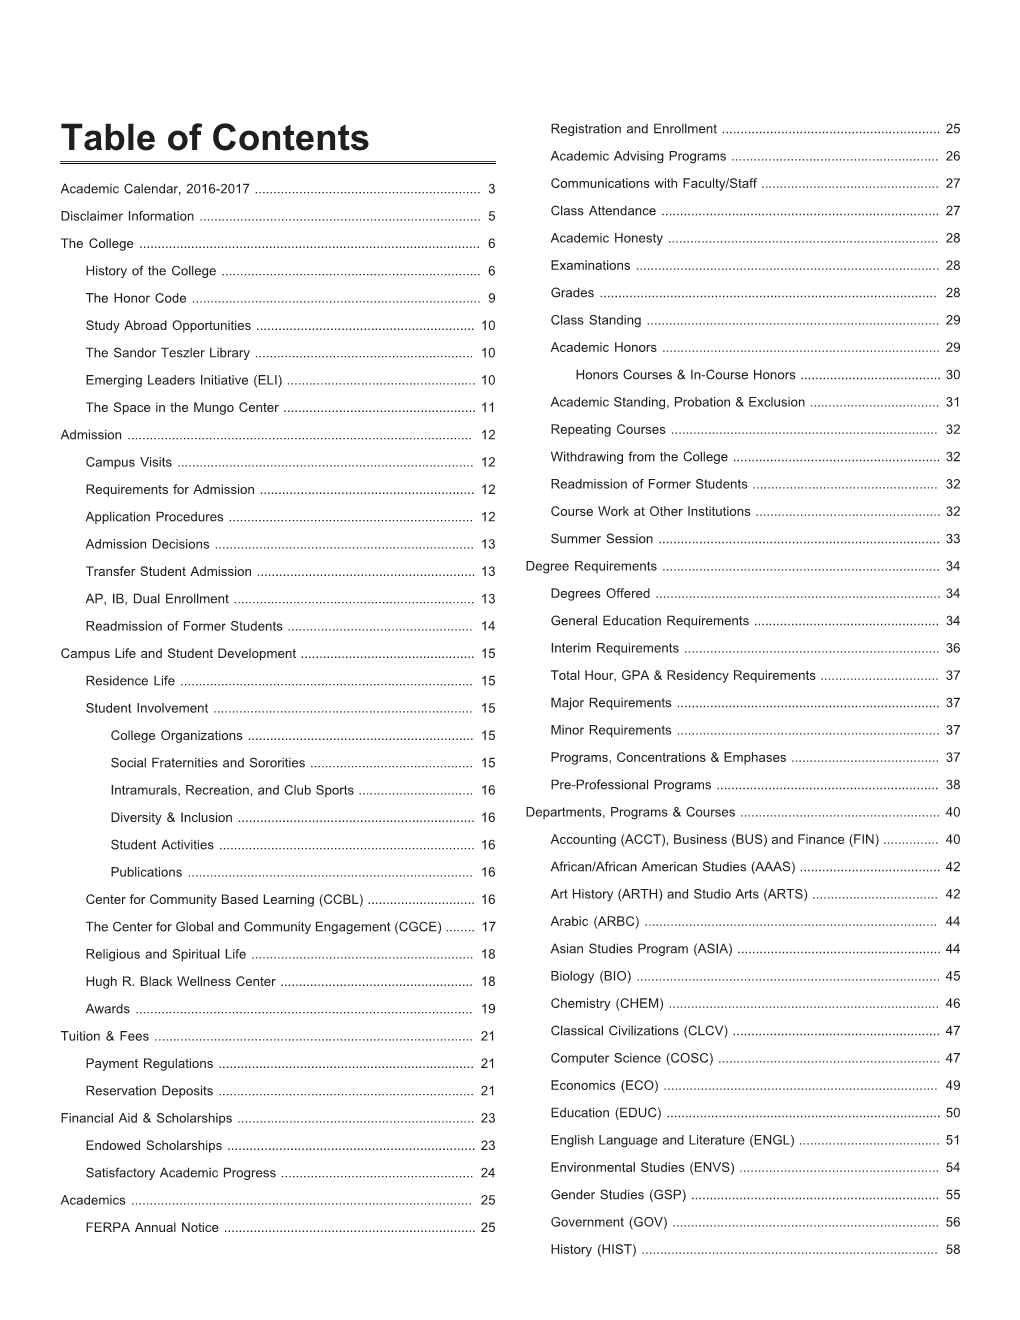 Table of Contents Academic Advising Programs